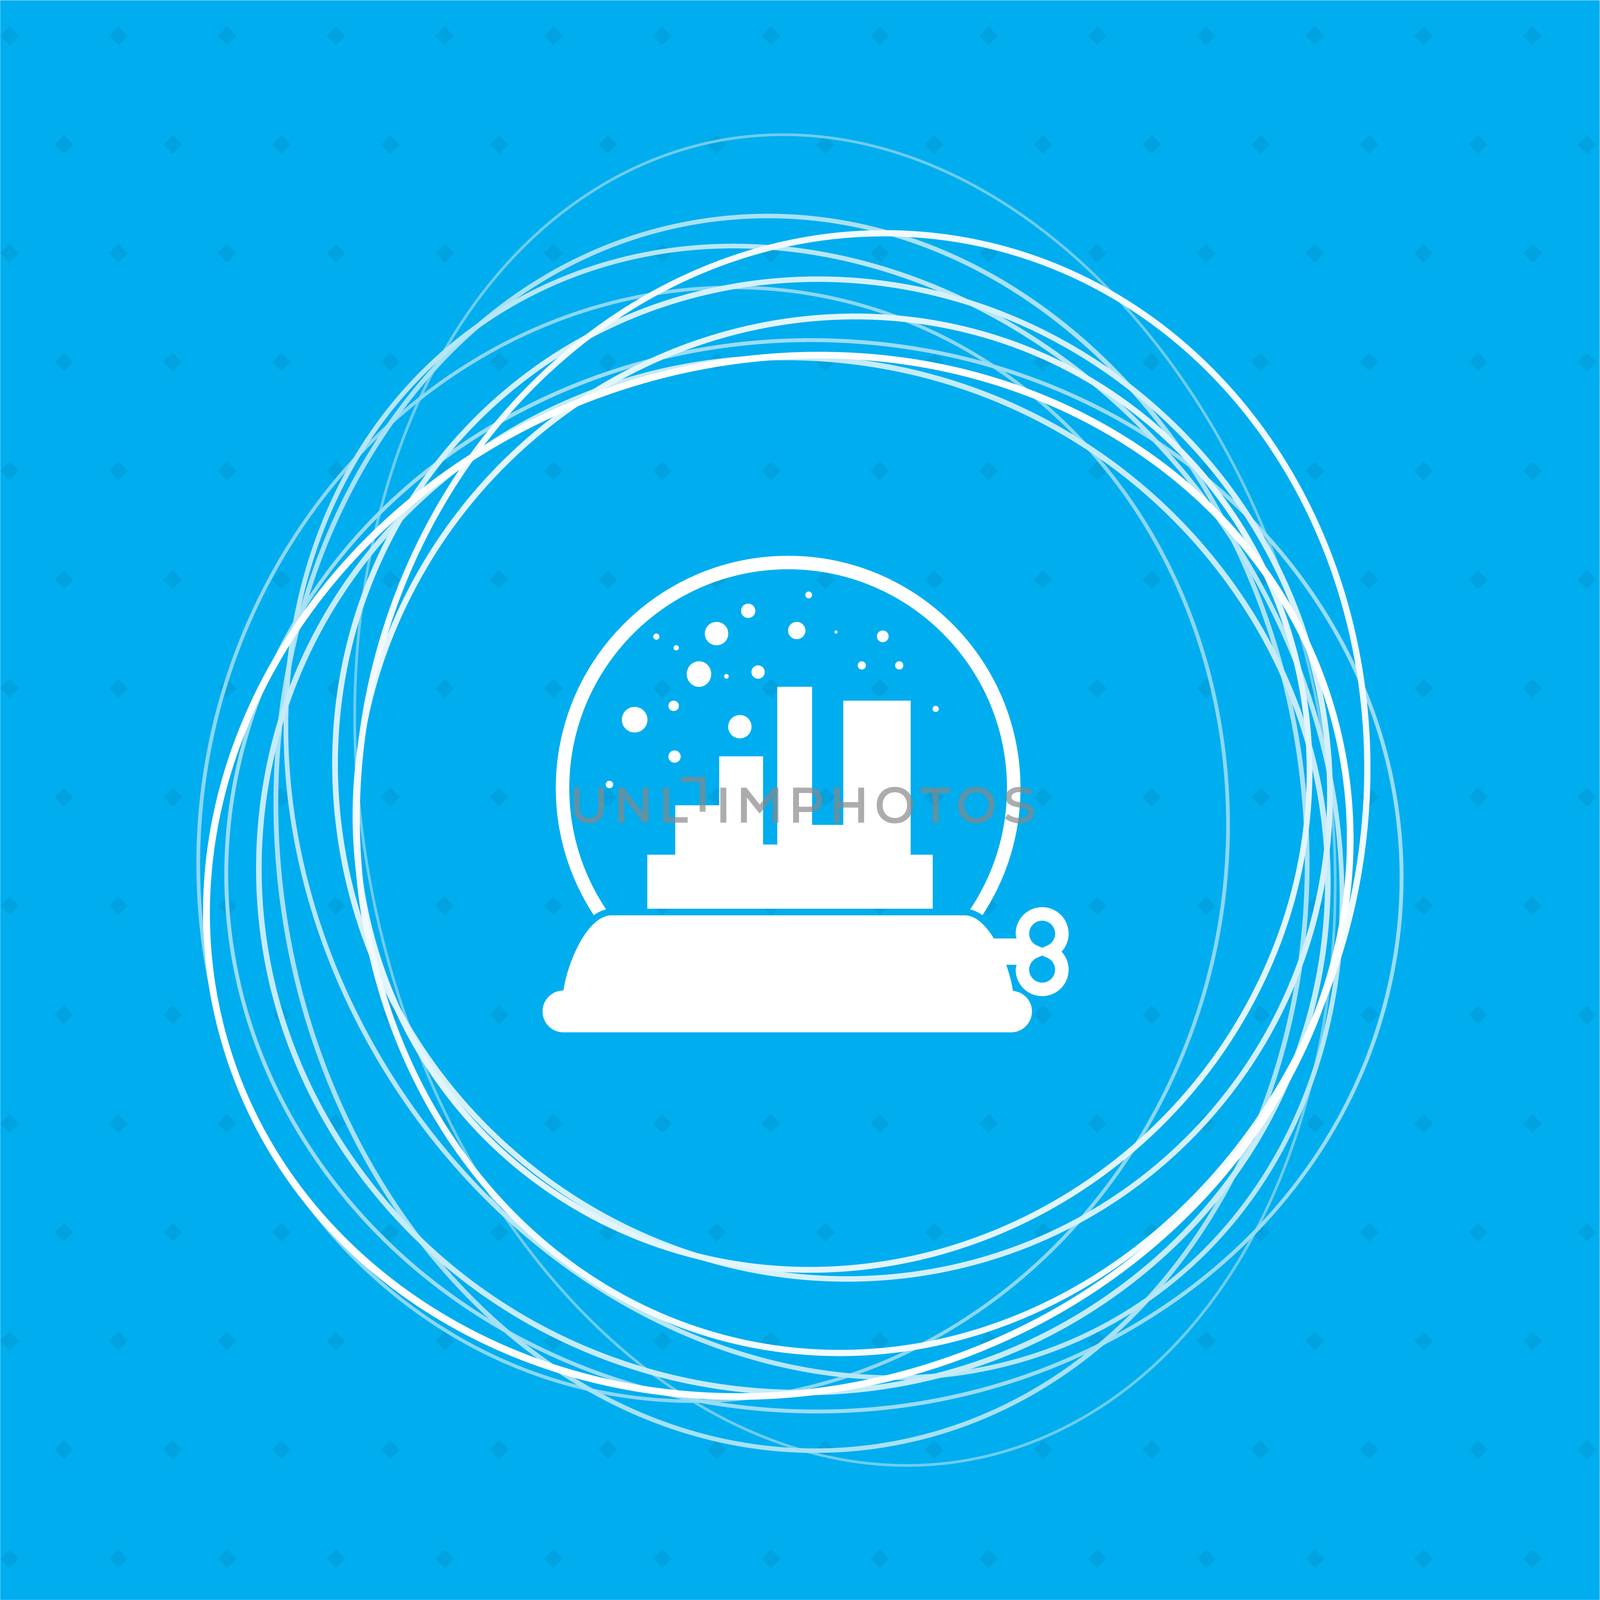 factory icon on a blue background with abstract circles around and place for your text.  by Adamchuk